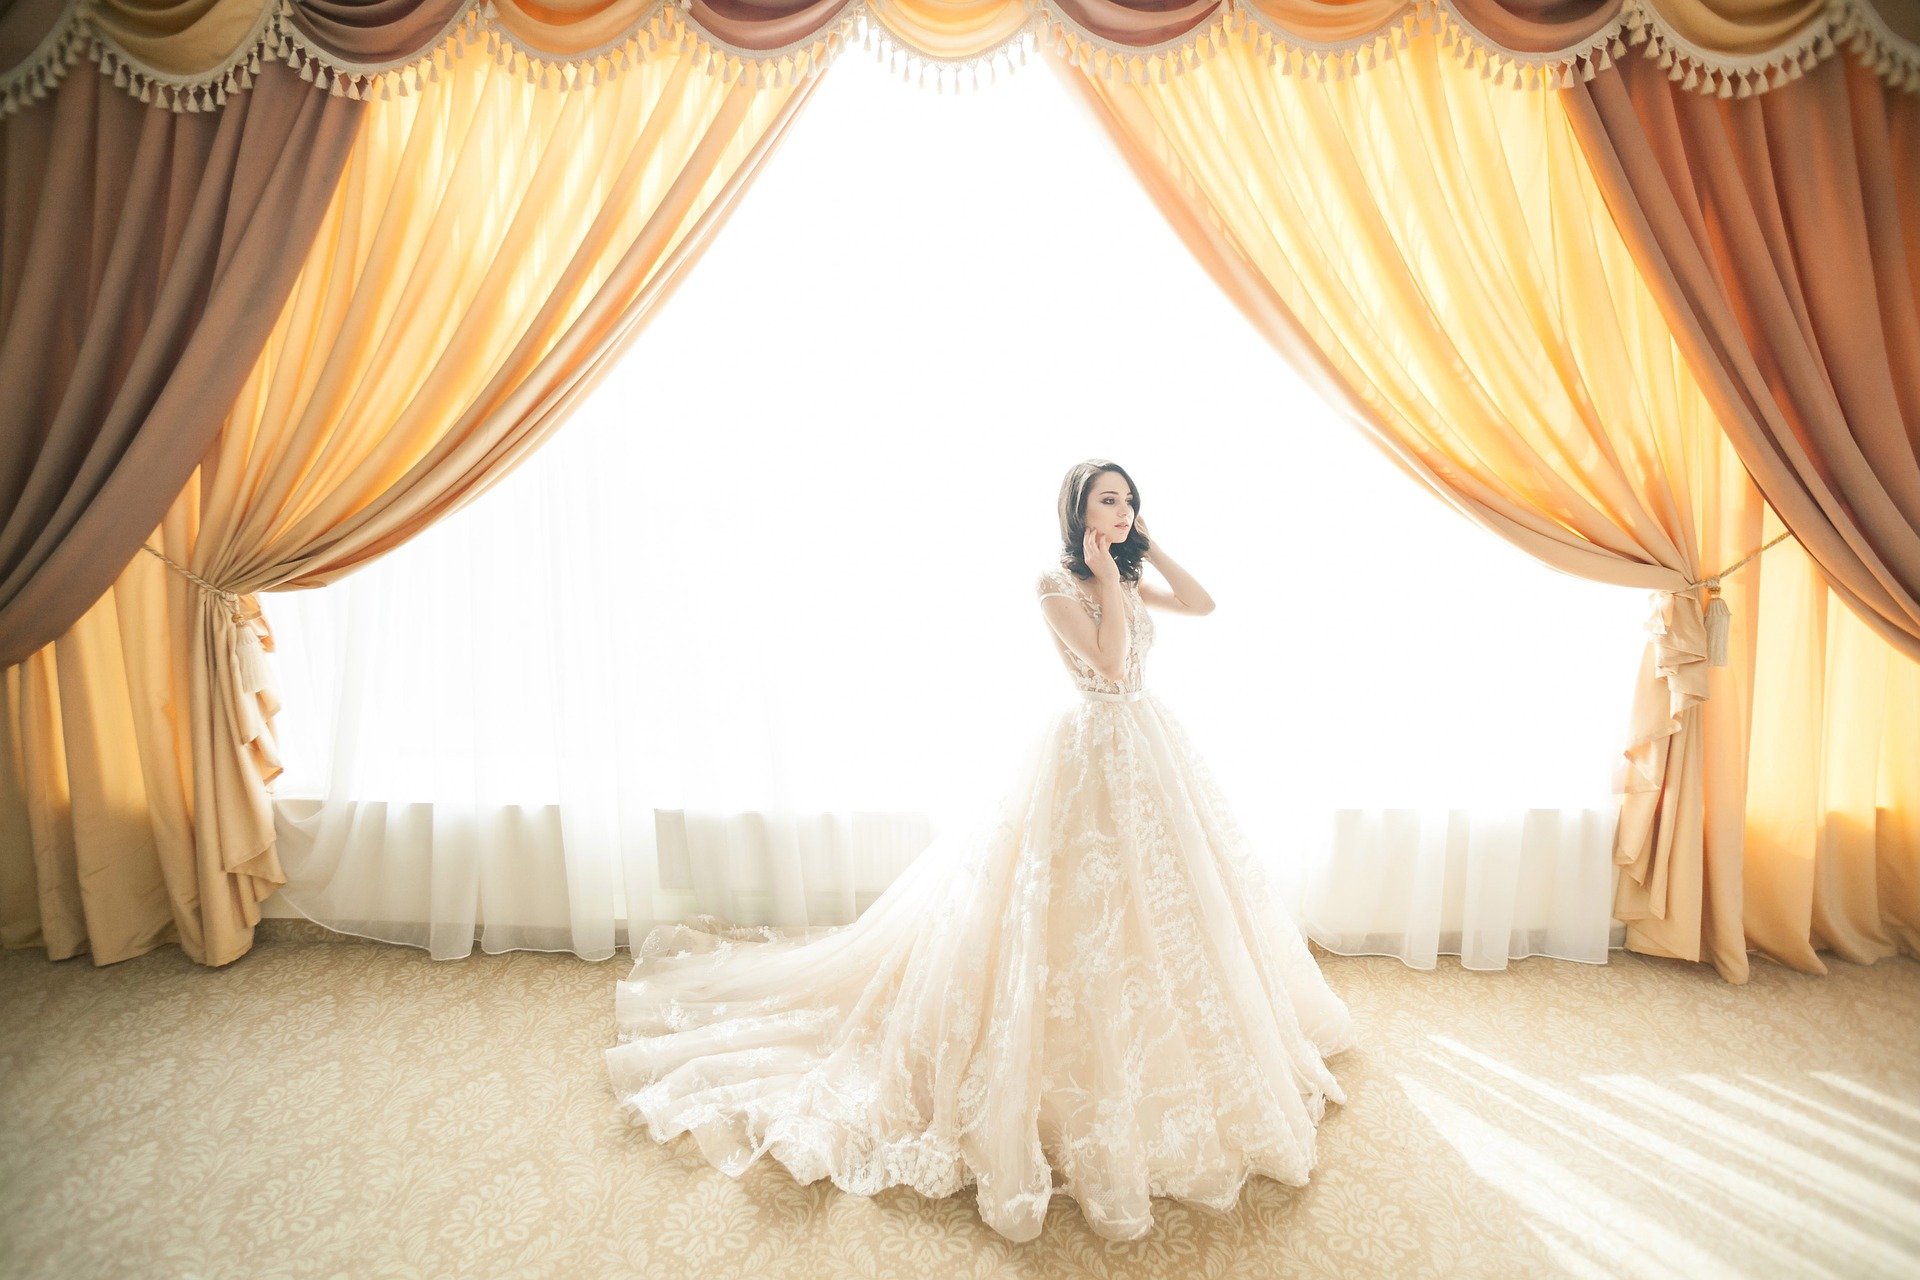 A bride wearing a lace wedding dress by the window. | Source: Pixabay